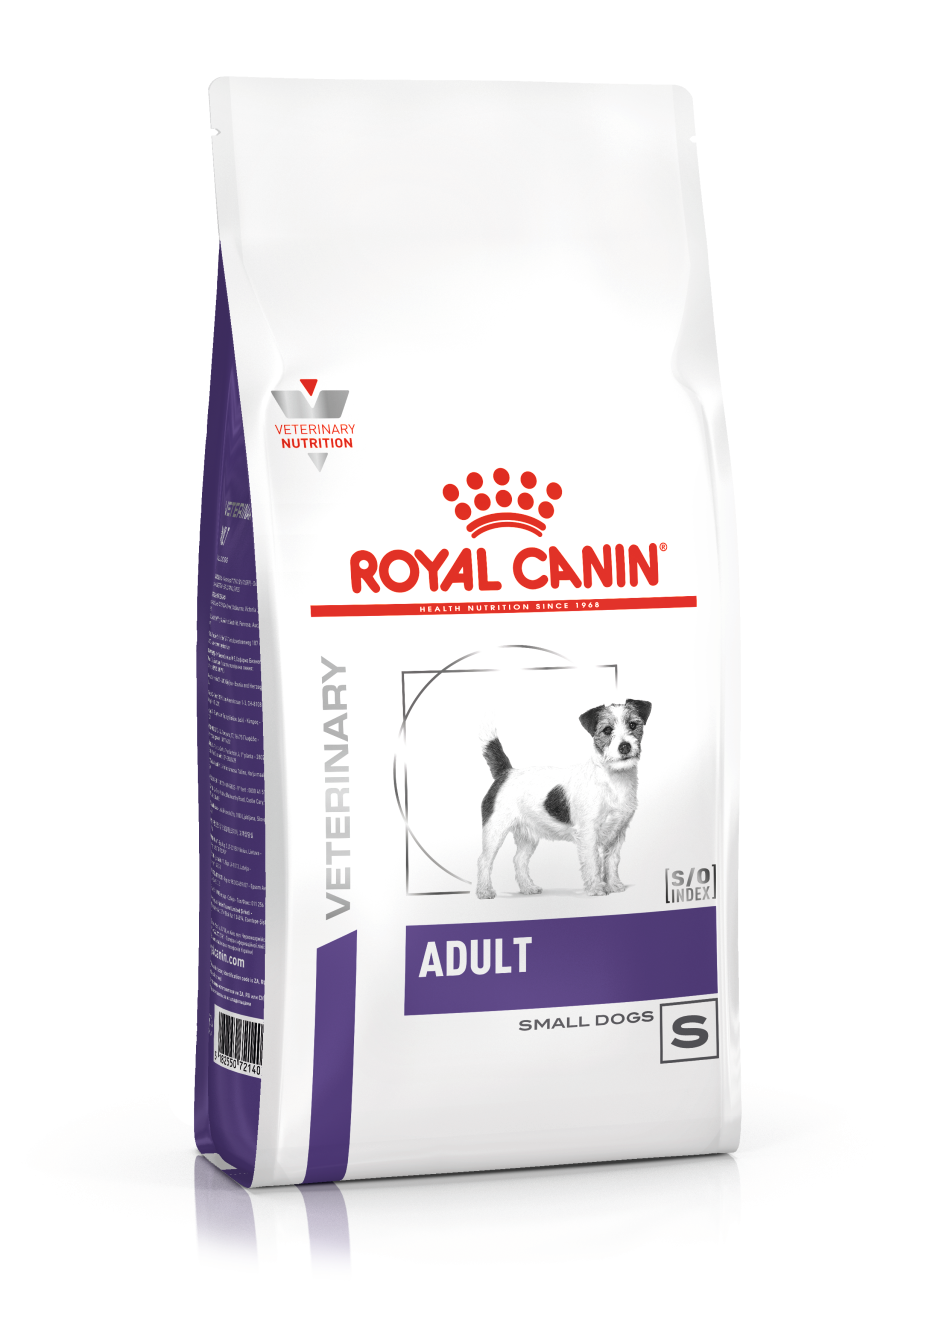 Royal canin Adult Small Dog  2x 2 kg